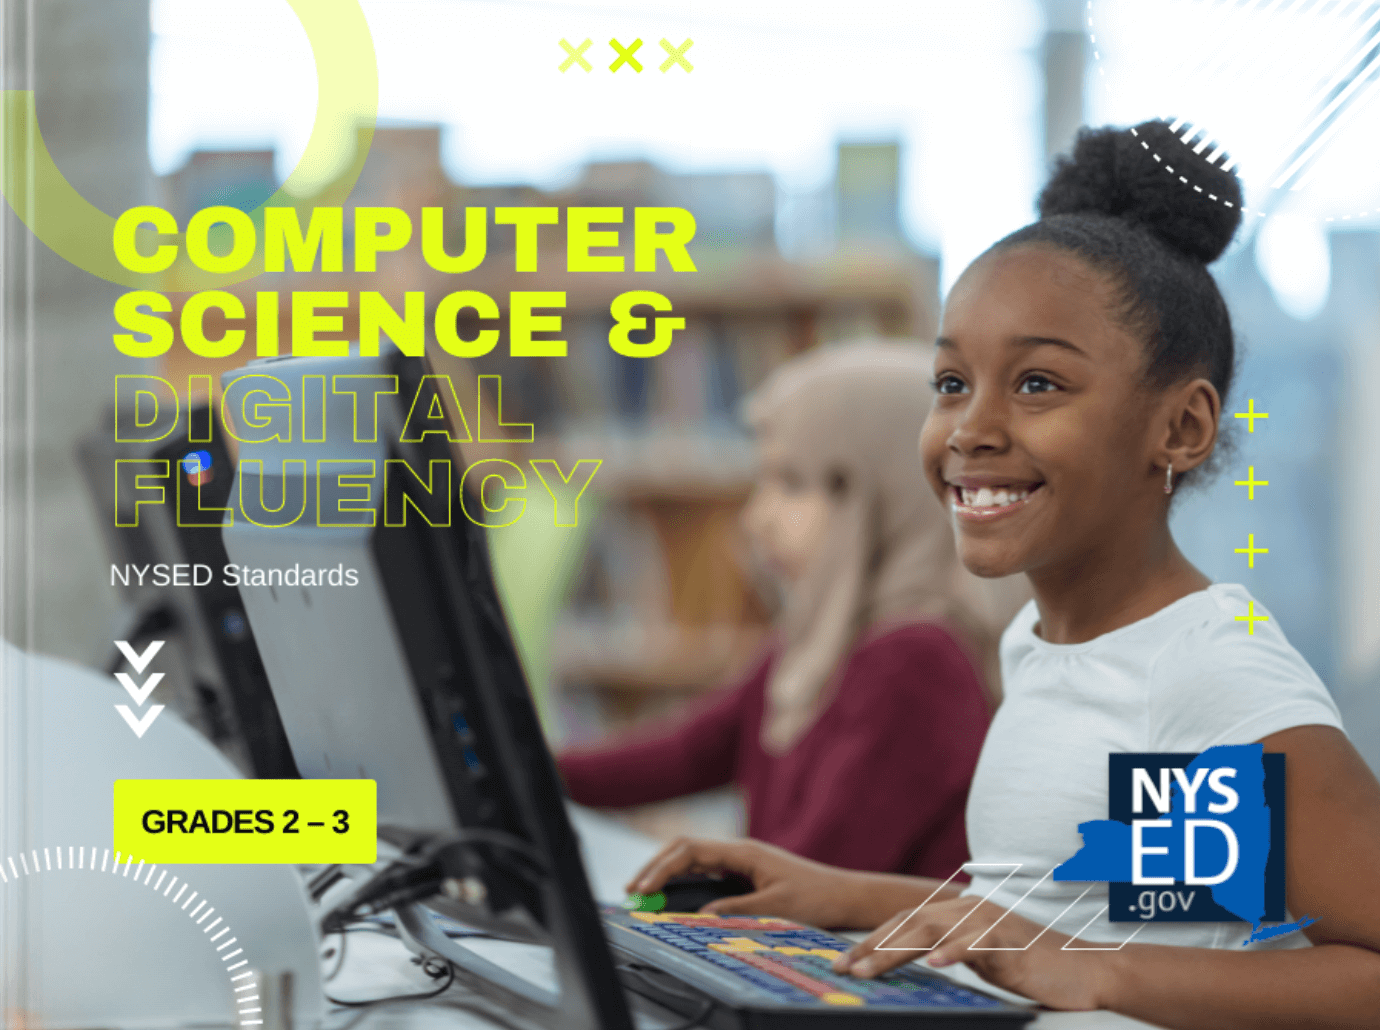 Featured image for “NYSED Computer Science and Digital Fluency Standards books”